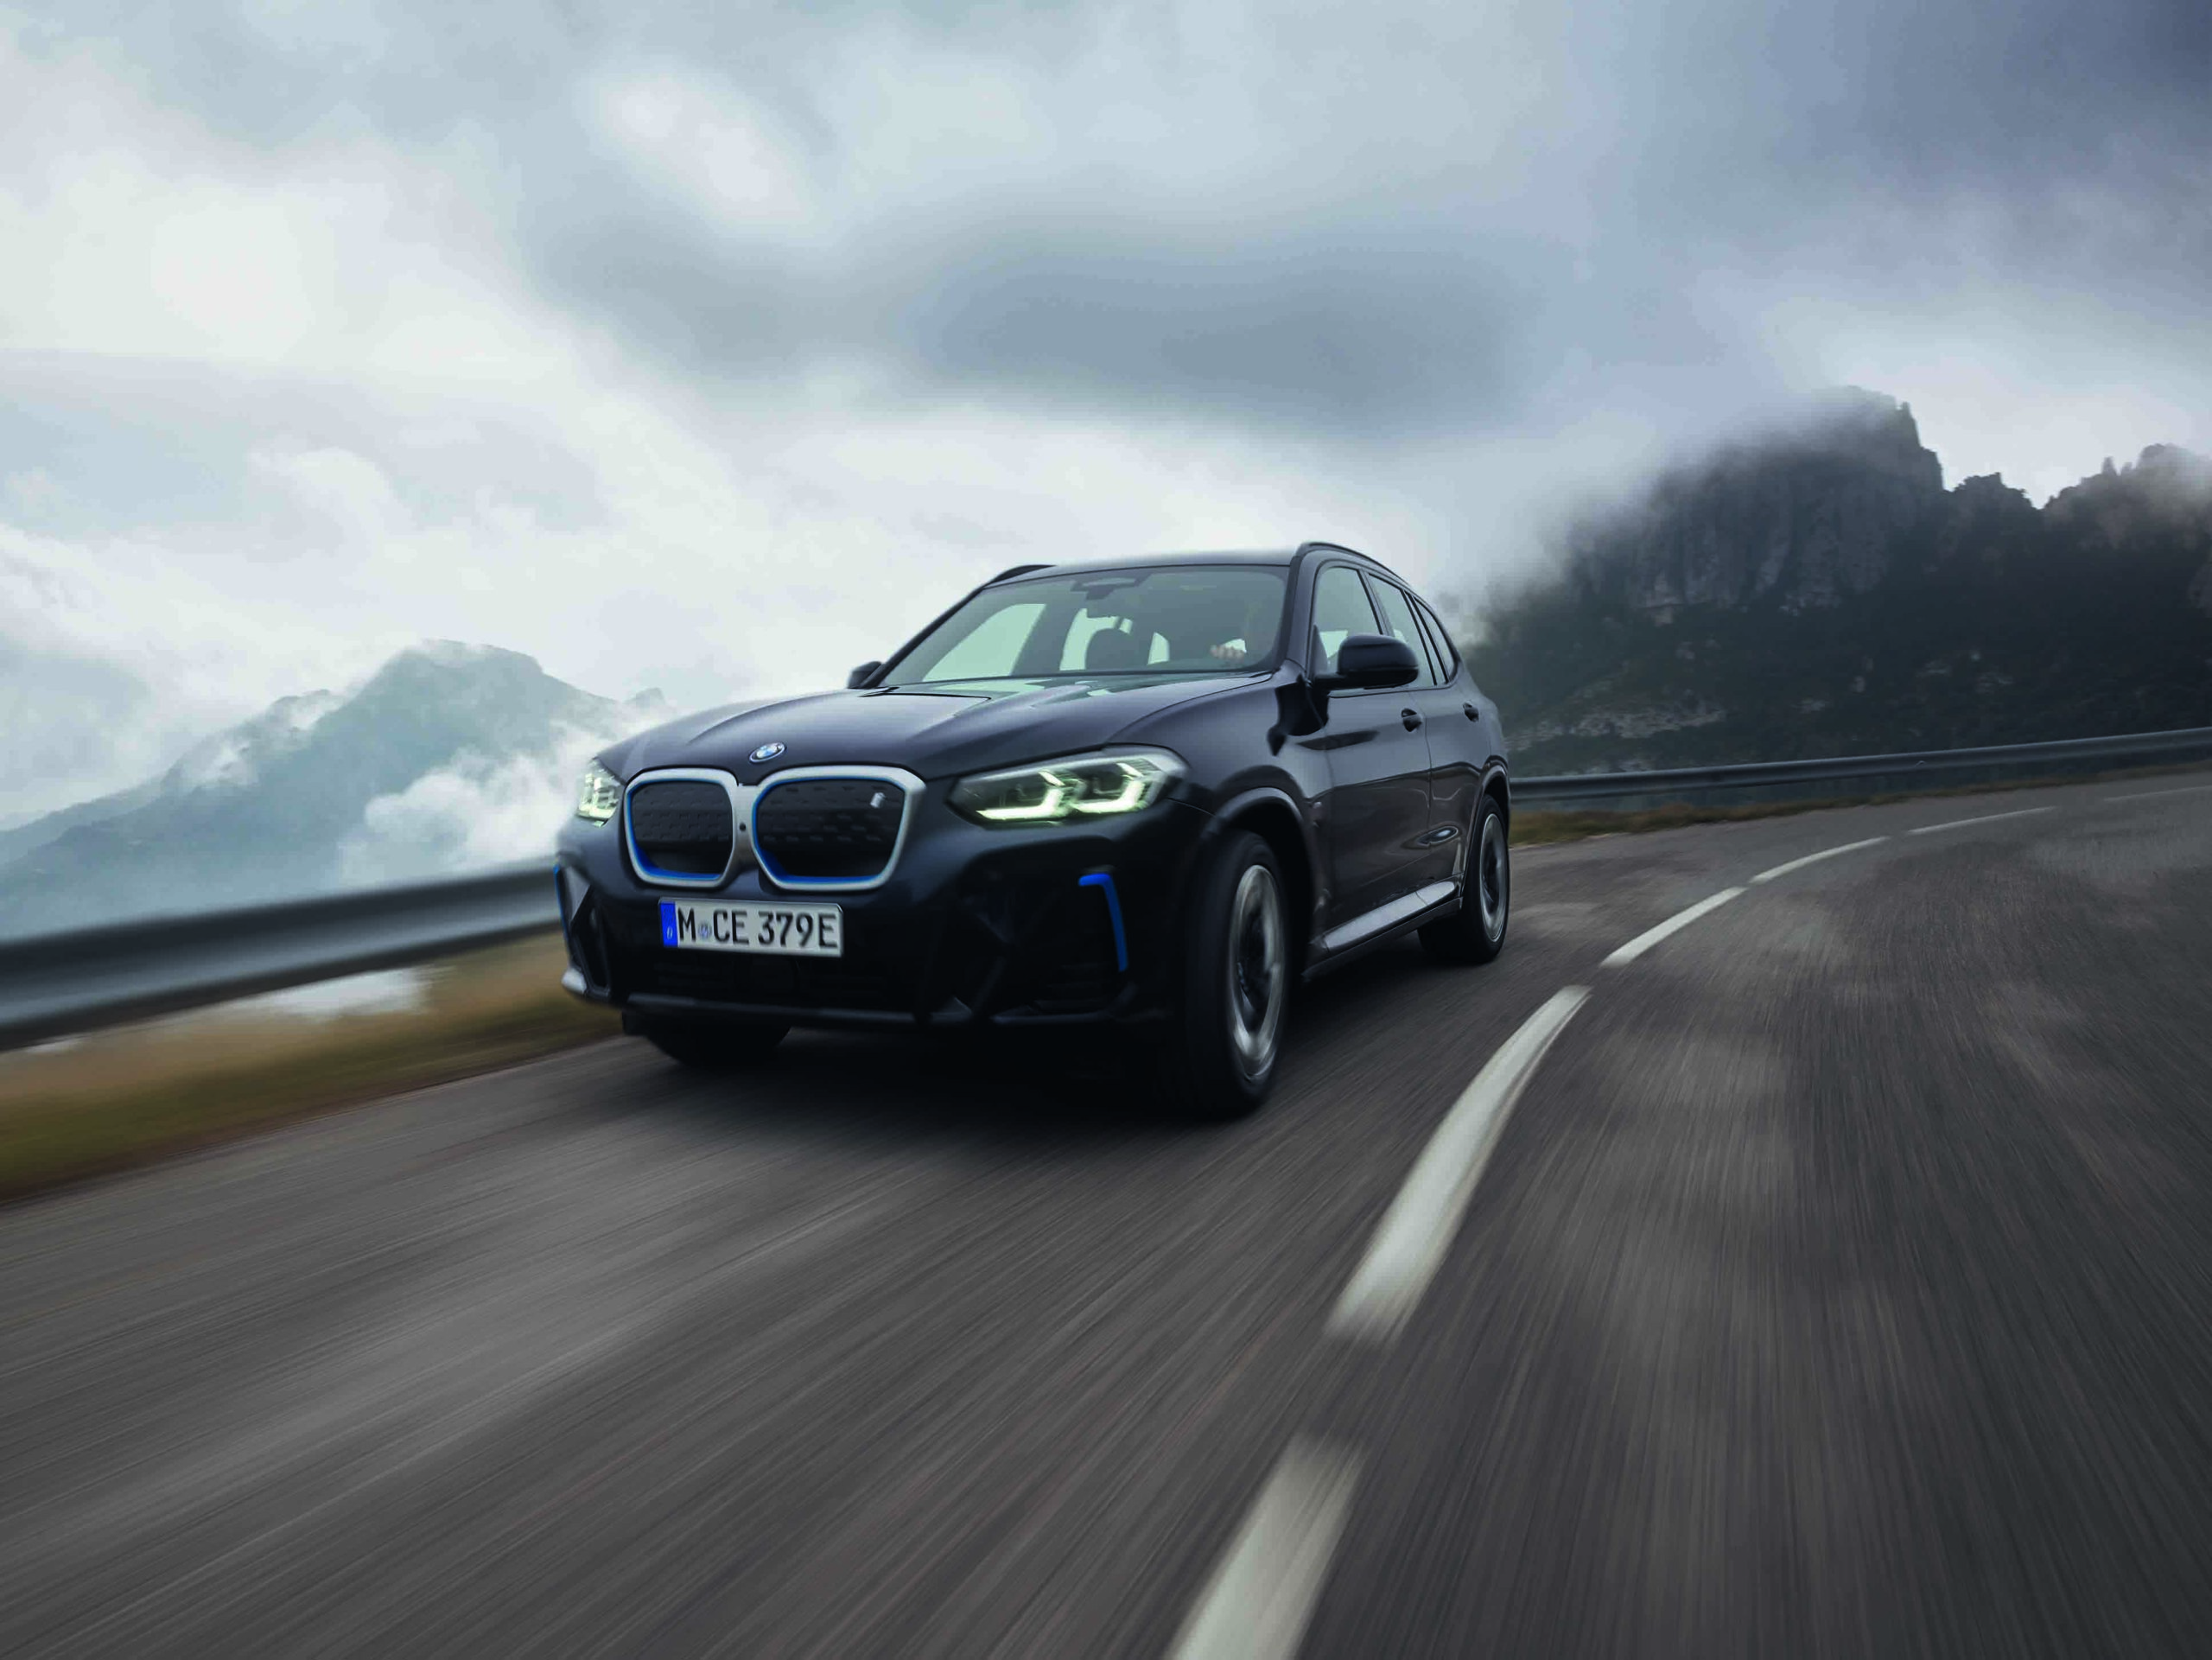 02. The First Ever BMW iX3 scaled